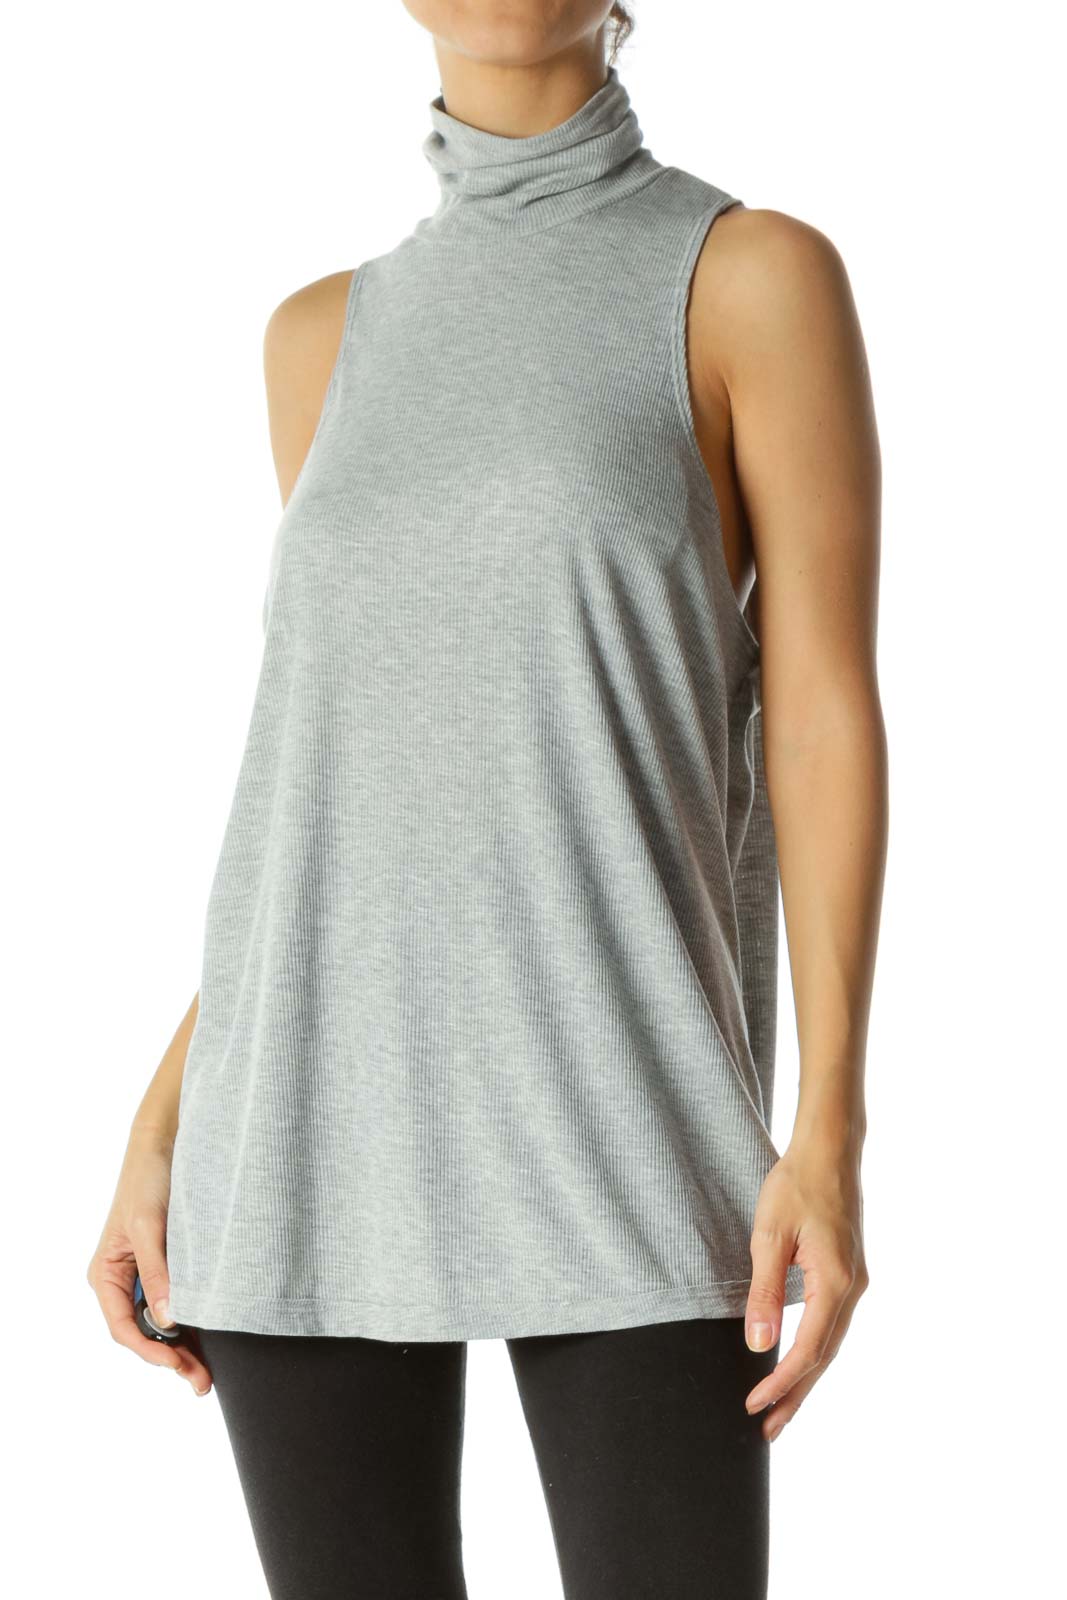 Gray Turtle Neck Soft Sleeveless Stretch Tank Top Front